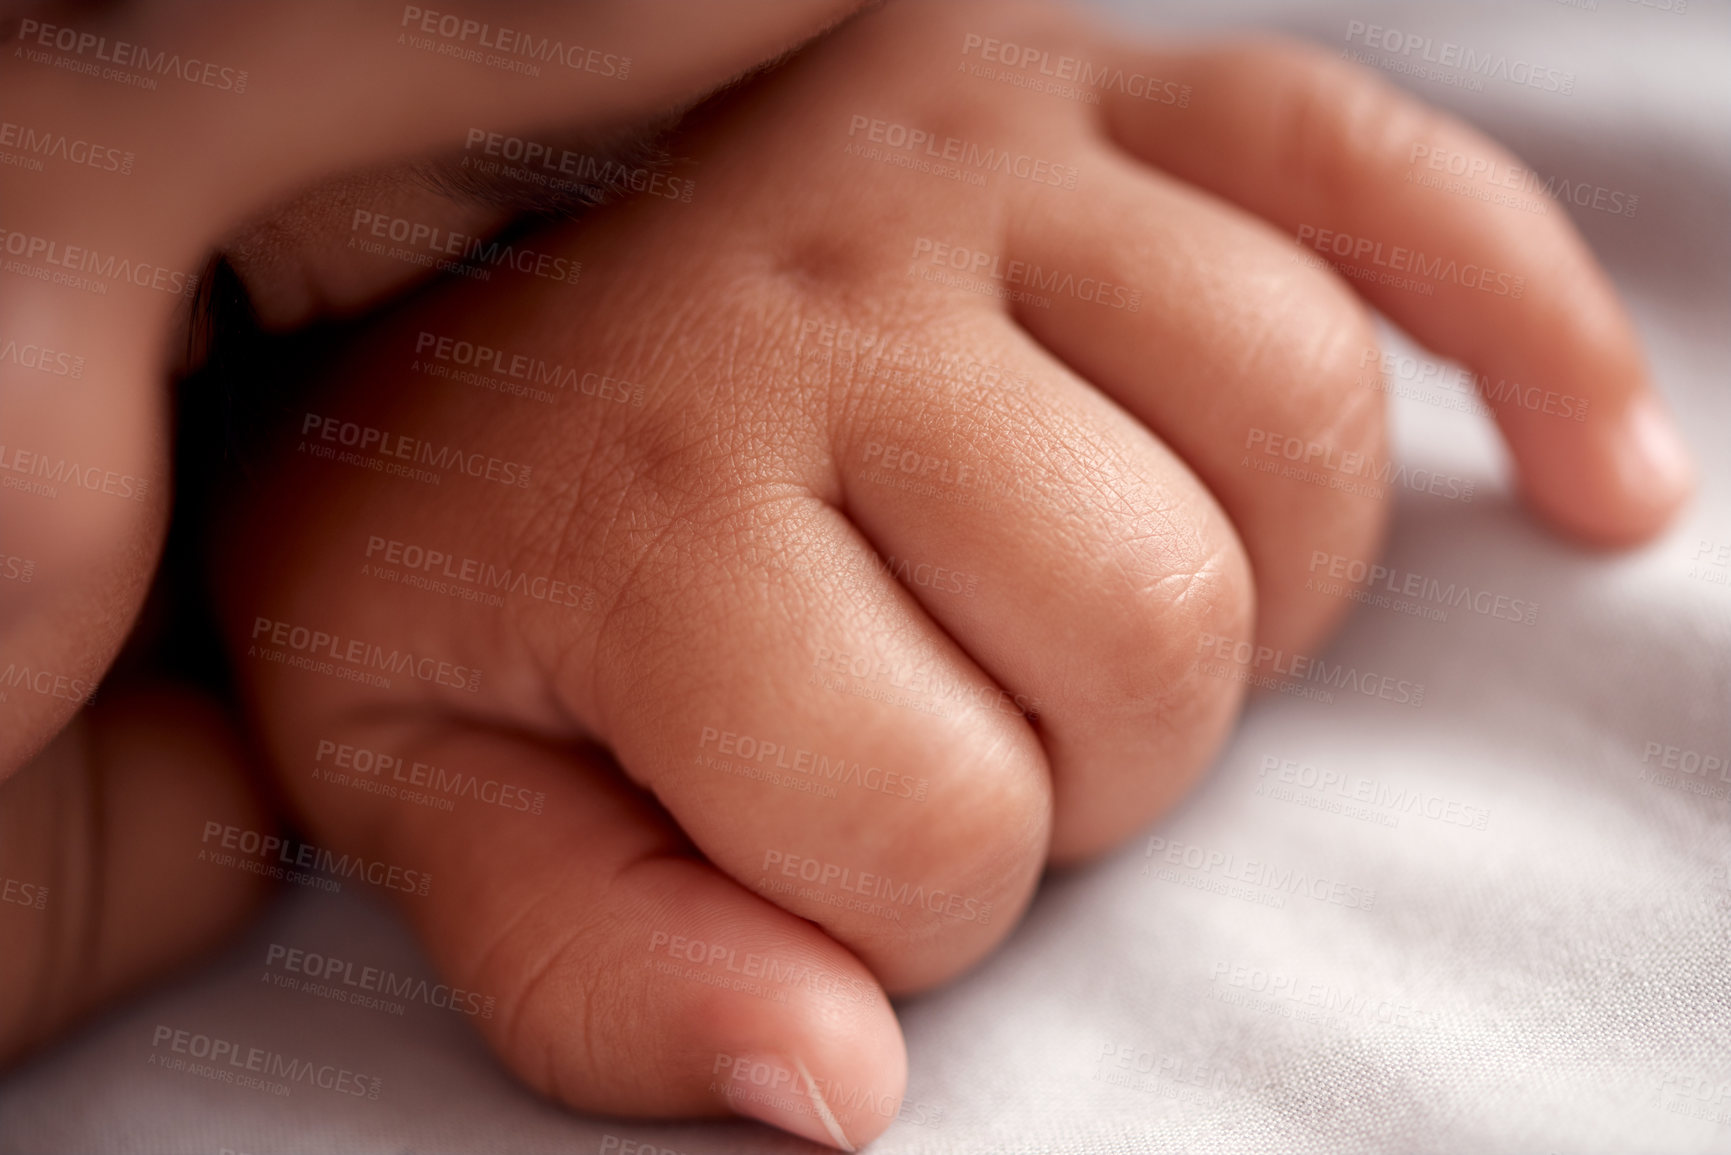 Buy stock photo Shot of an adorable baby boy sleeping peacefully on the bed at home